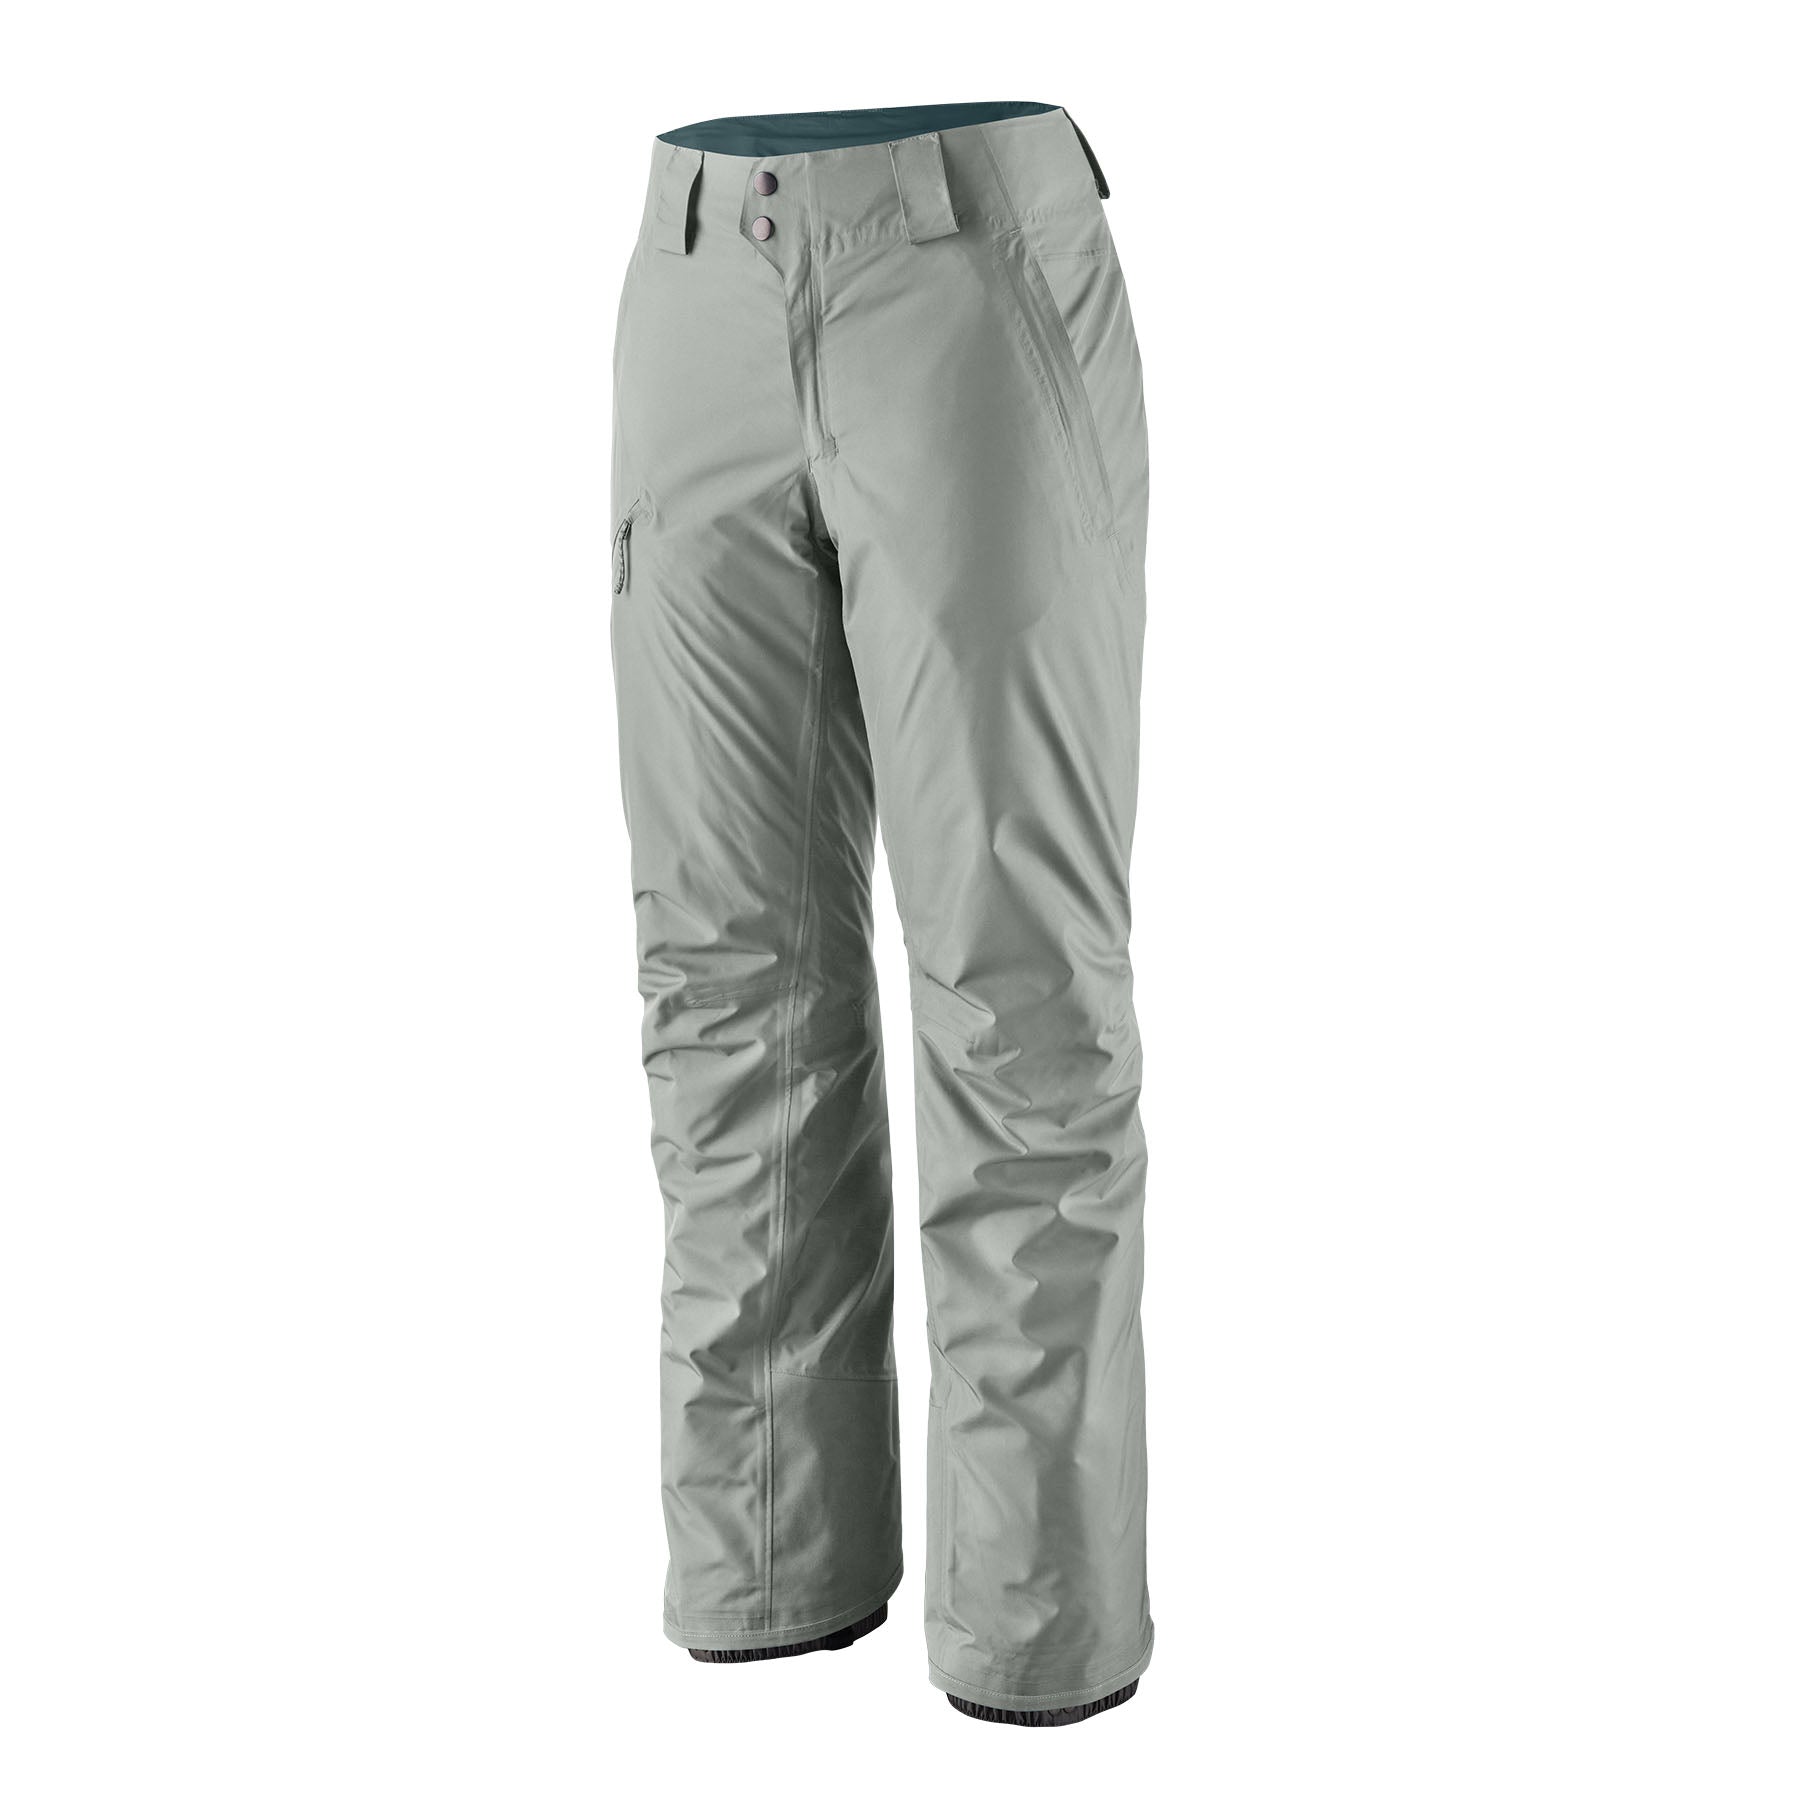 Patagonia Women's Insulated Powder Town Pants - Fall 2023